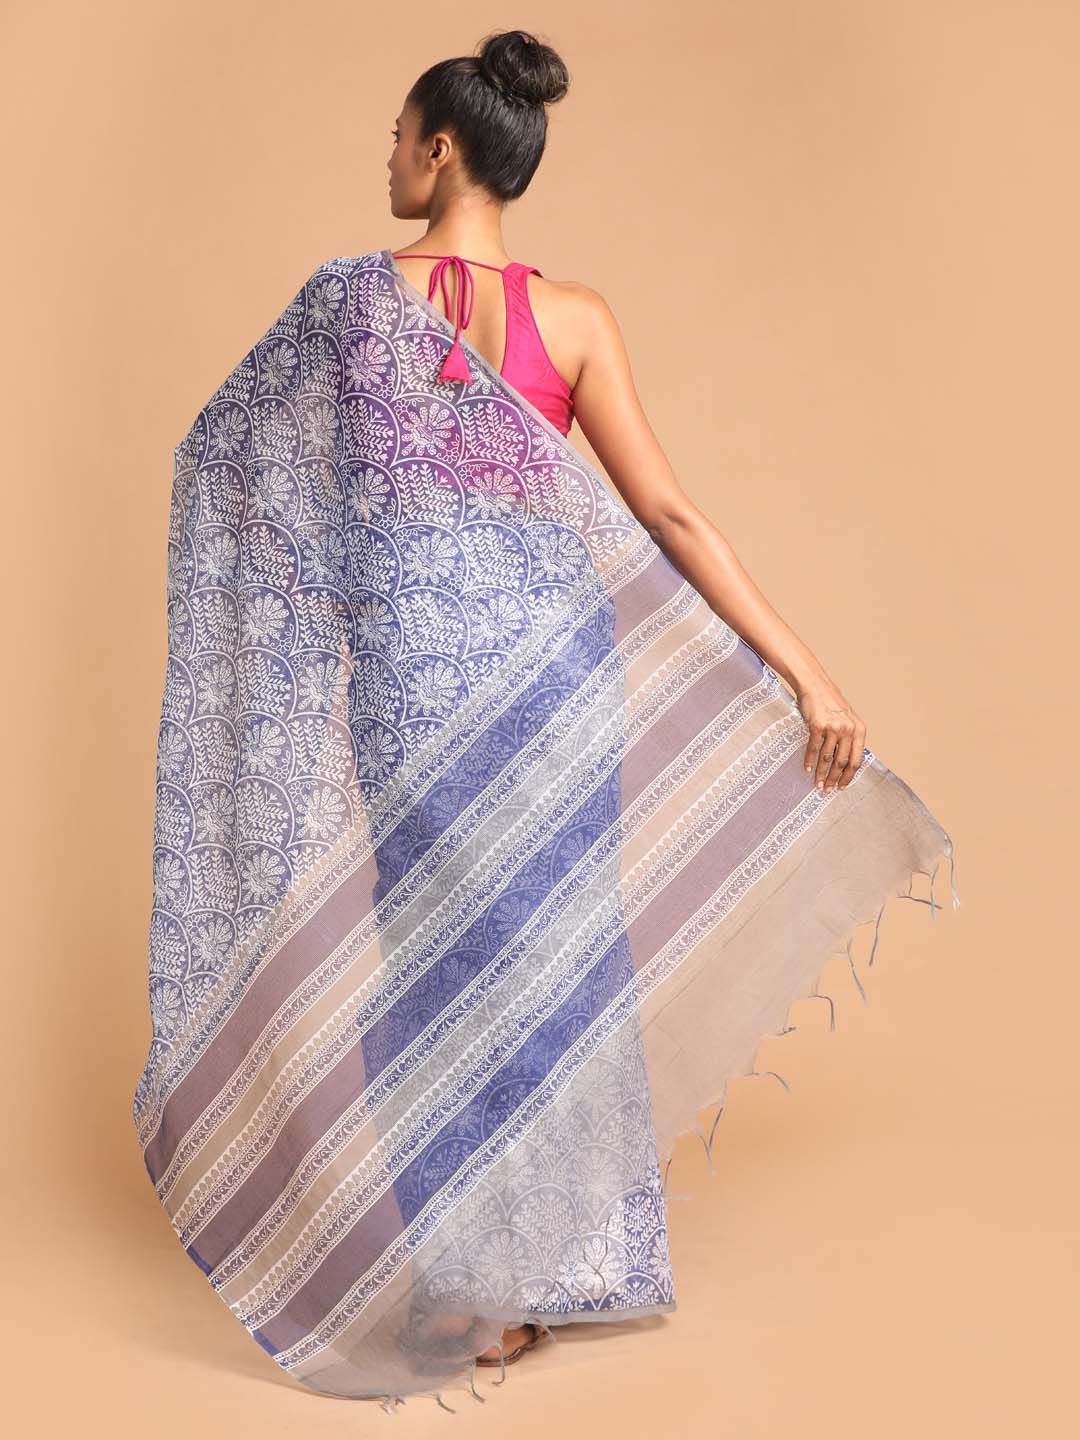 Indethnic Printed Super Net Saree in Blue - View 3